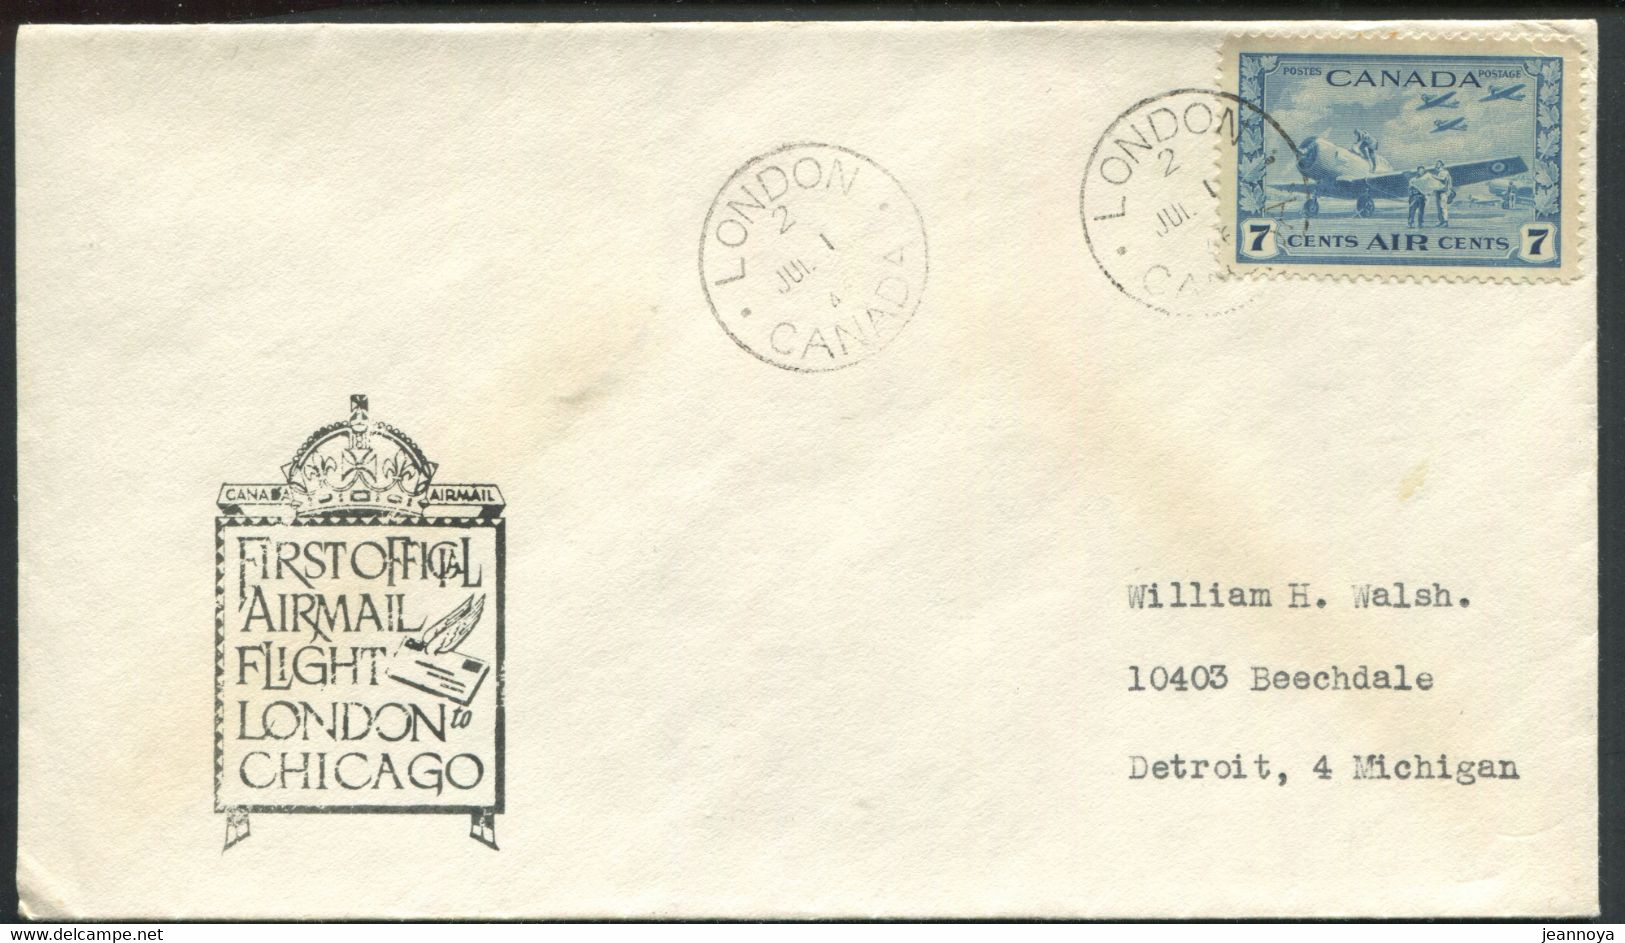 CANADA - PA N° 8 / 1er. VOL LONDON-CHICAGO LE 1/7/1946 ( MULLER N° 351 ) - SUP - First Flight Covers